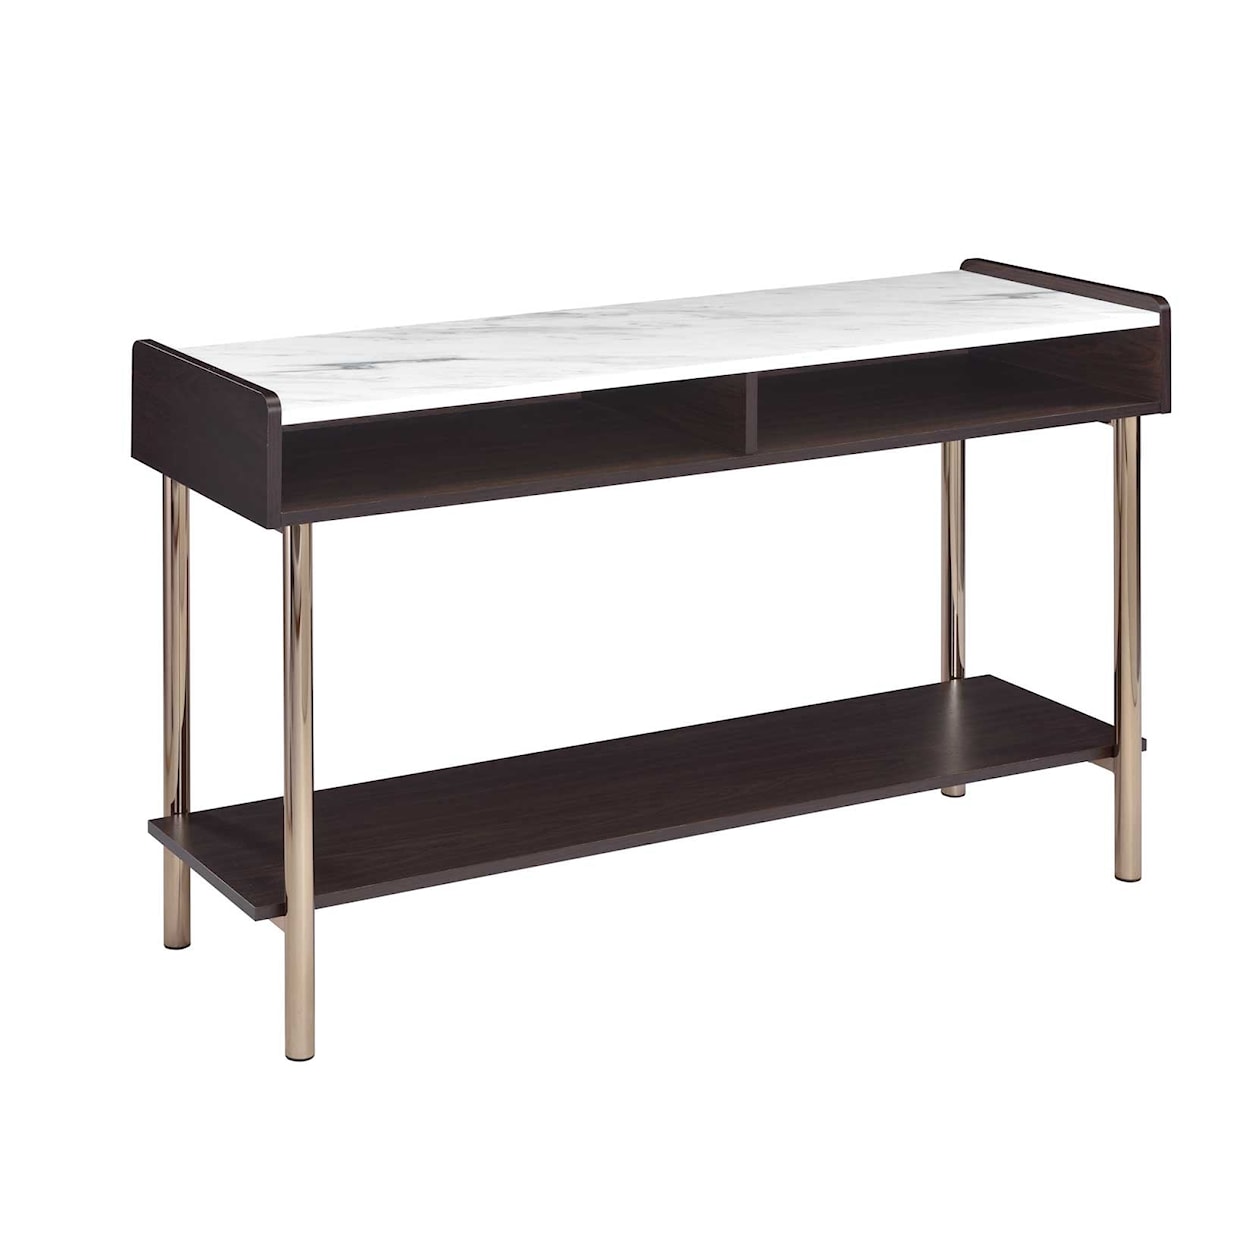 Prime Carrie Sofa Table with Storage